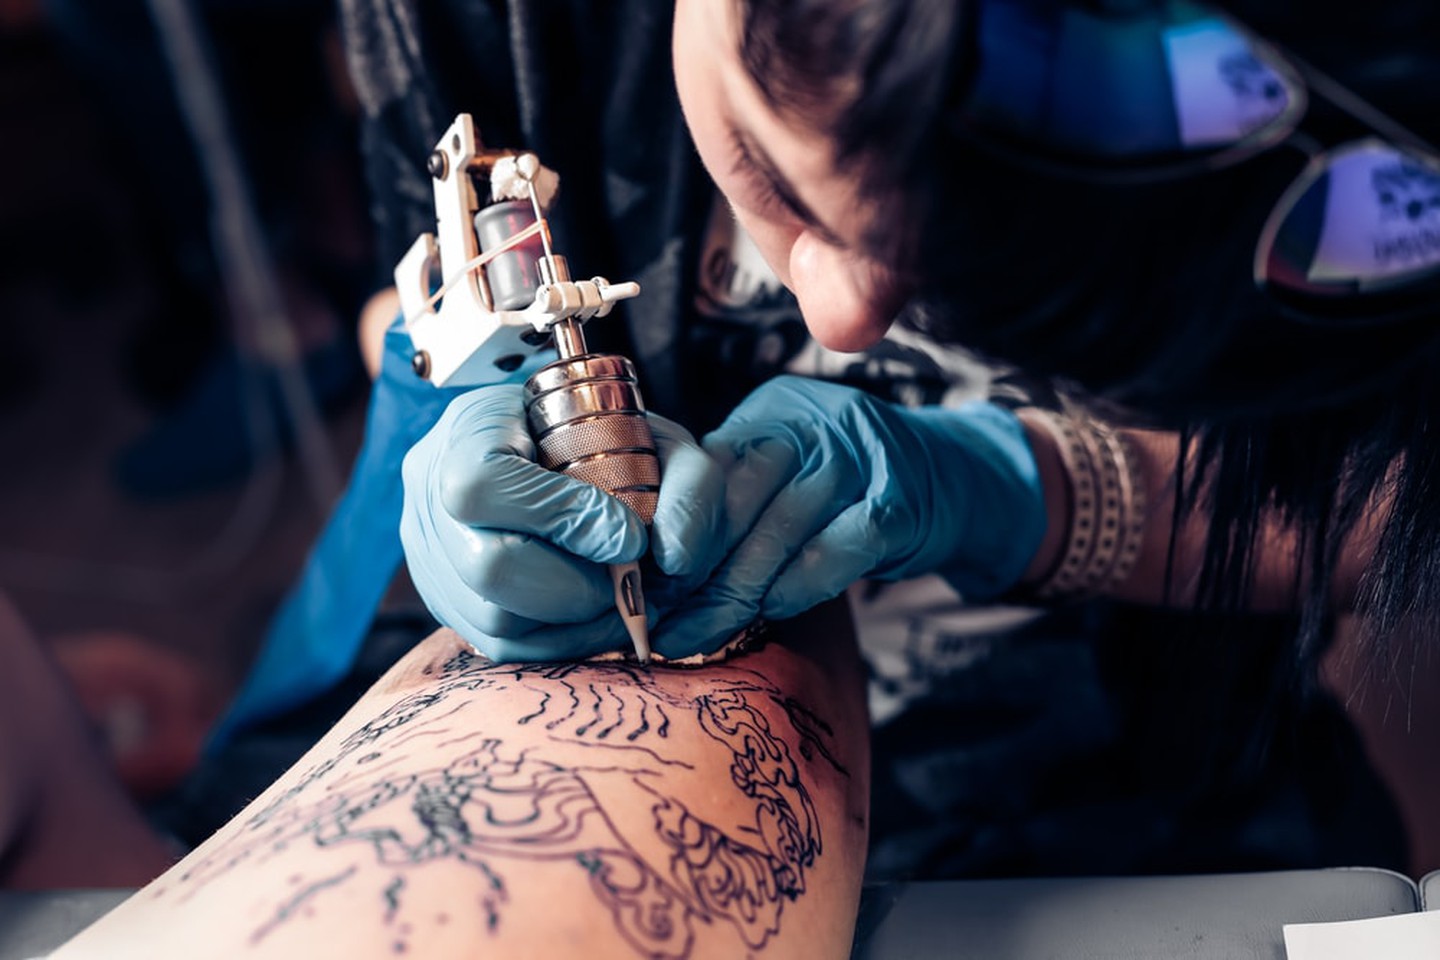 tattooing in the Western world